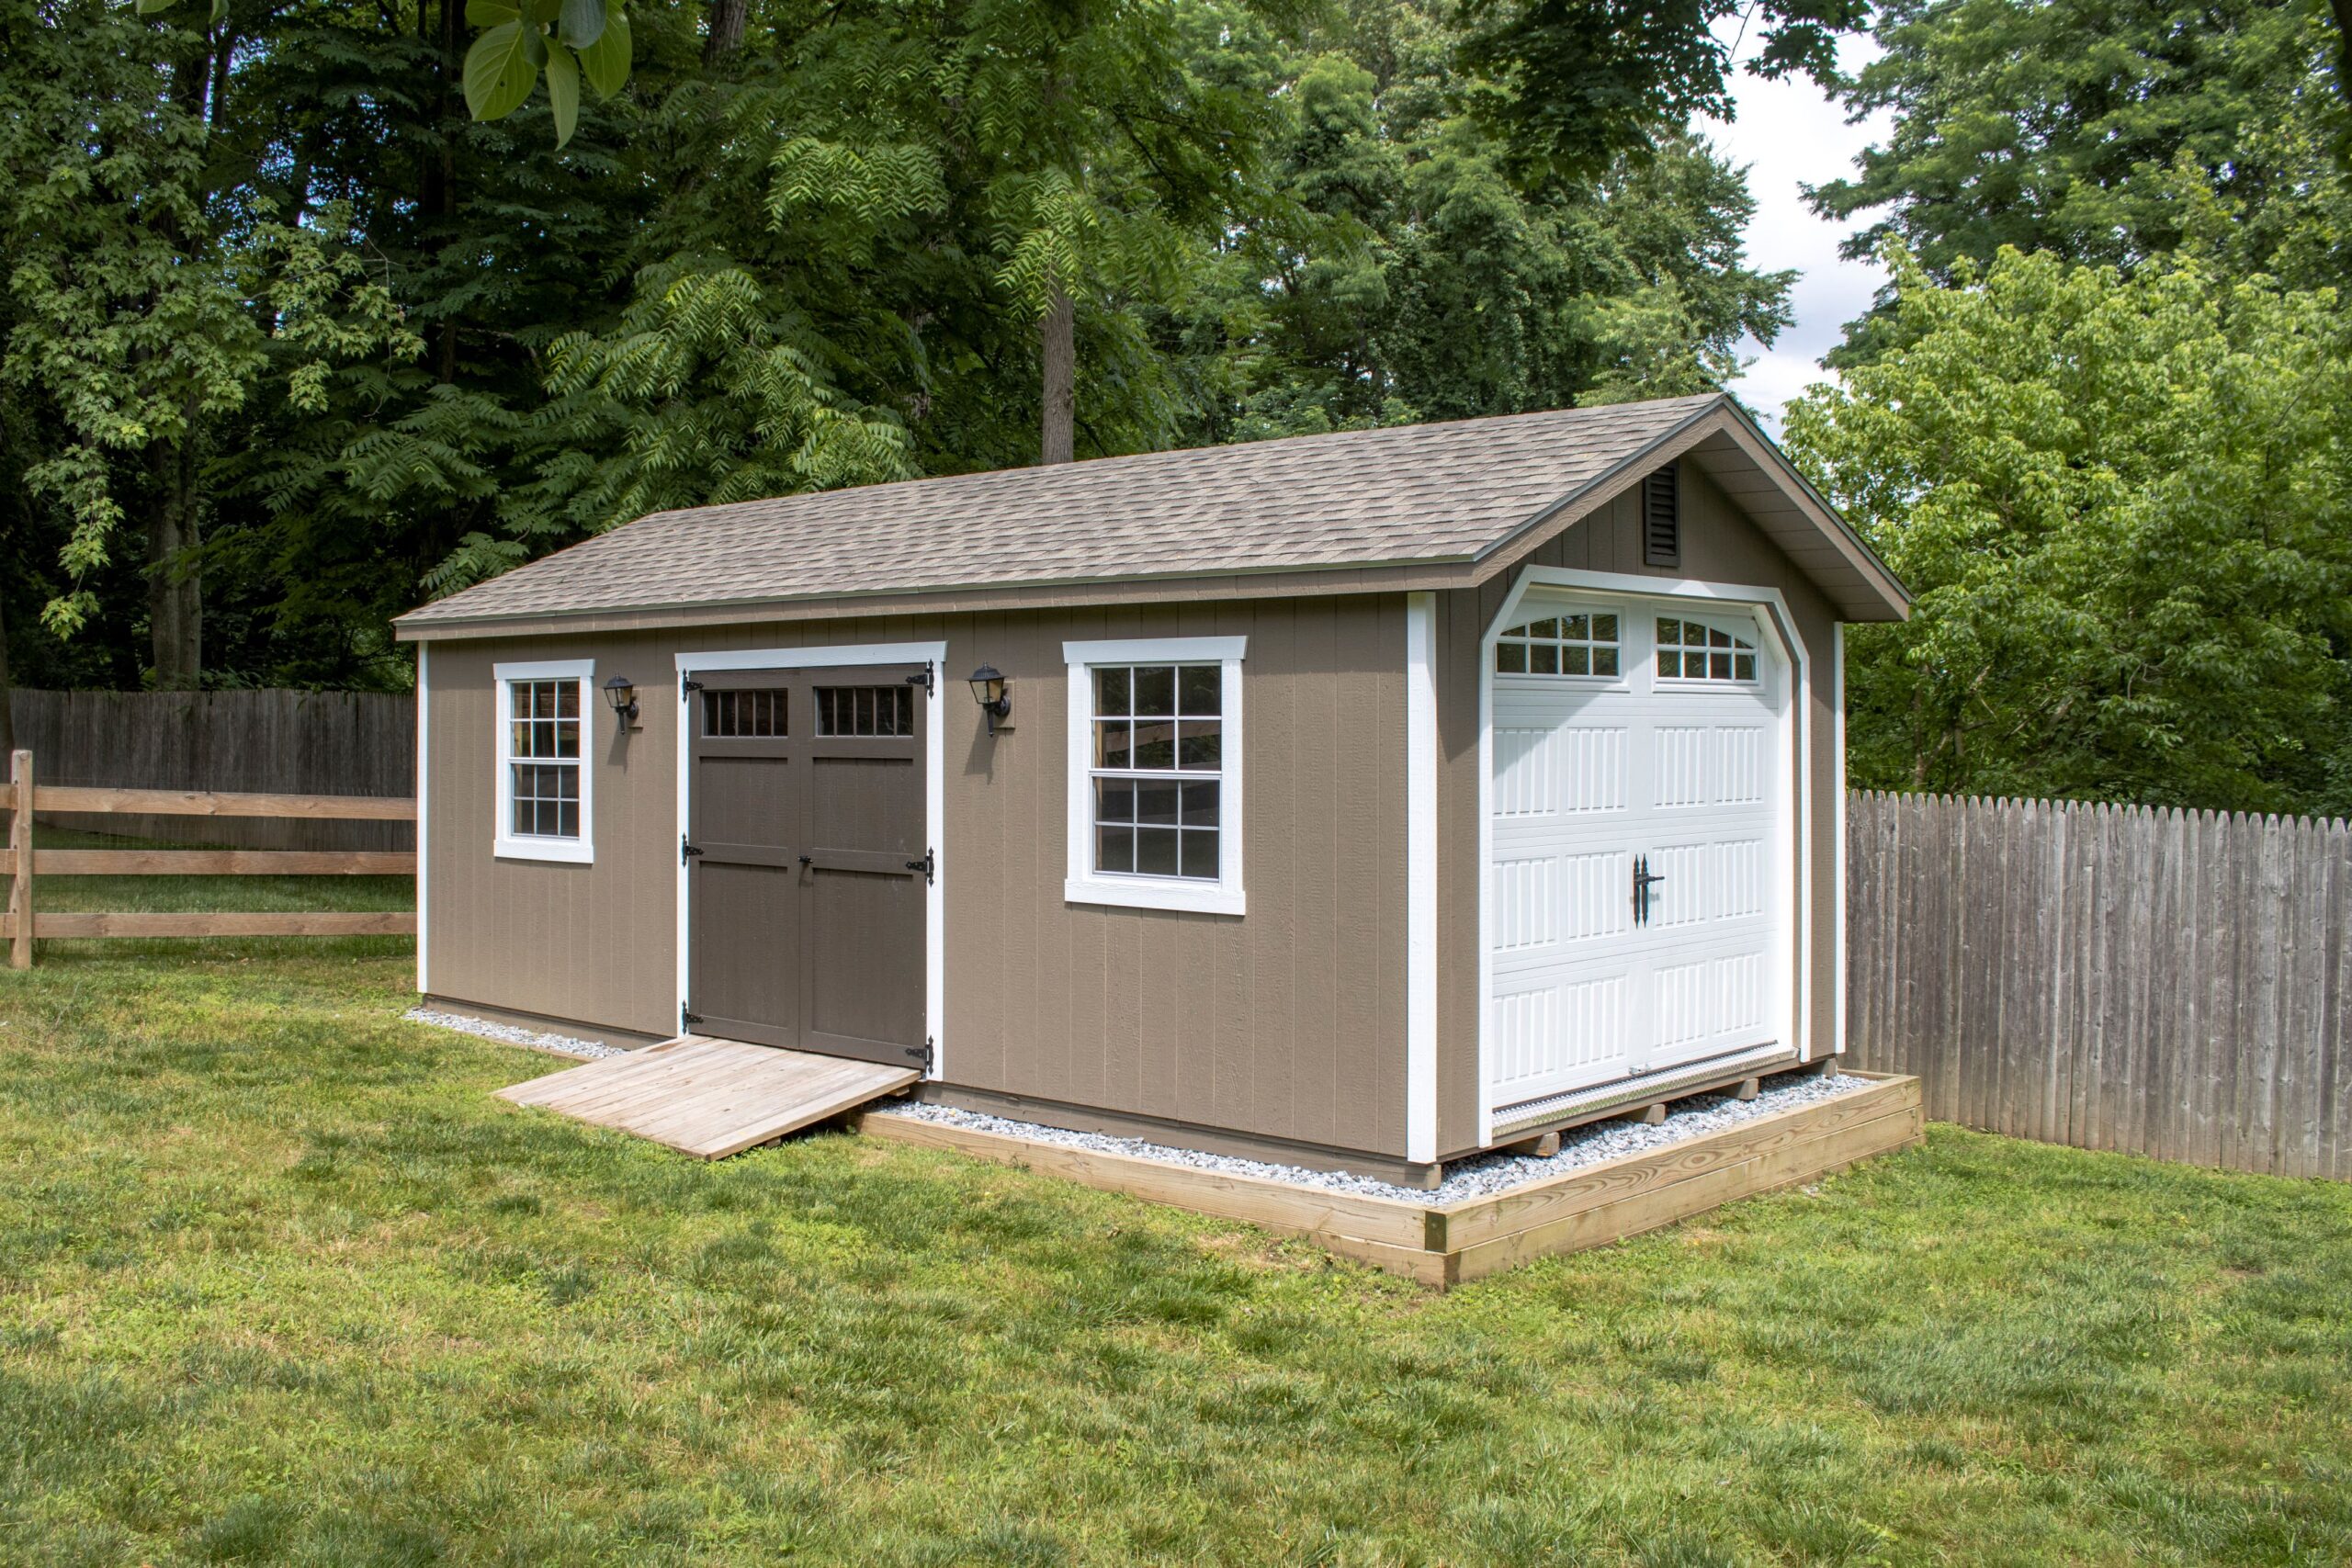 Exterior of a 1-car A-Frame Garage with brown siding and white trim.